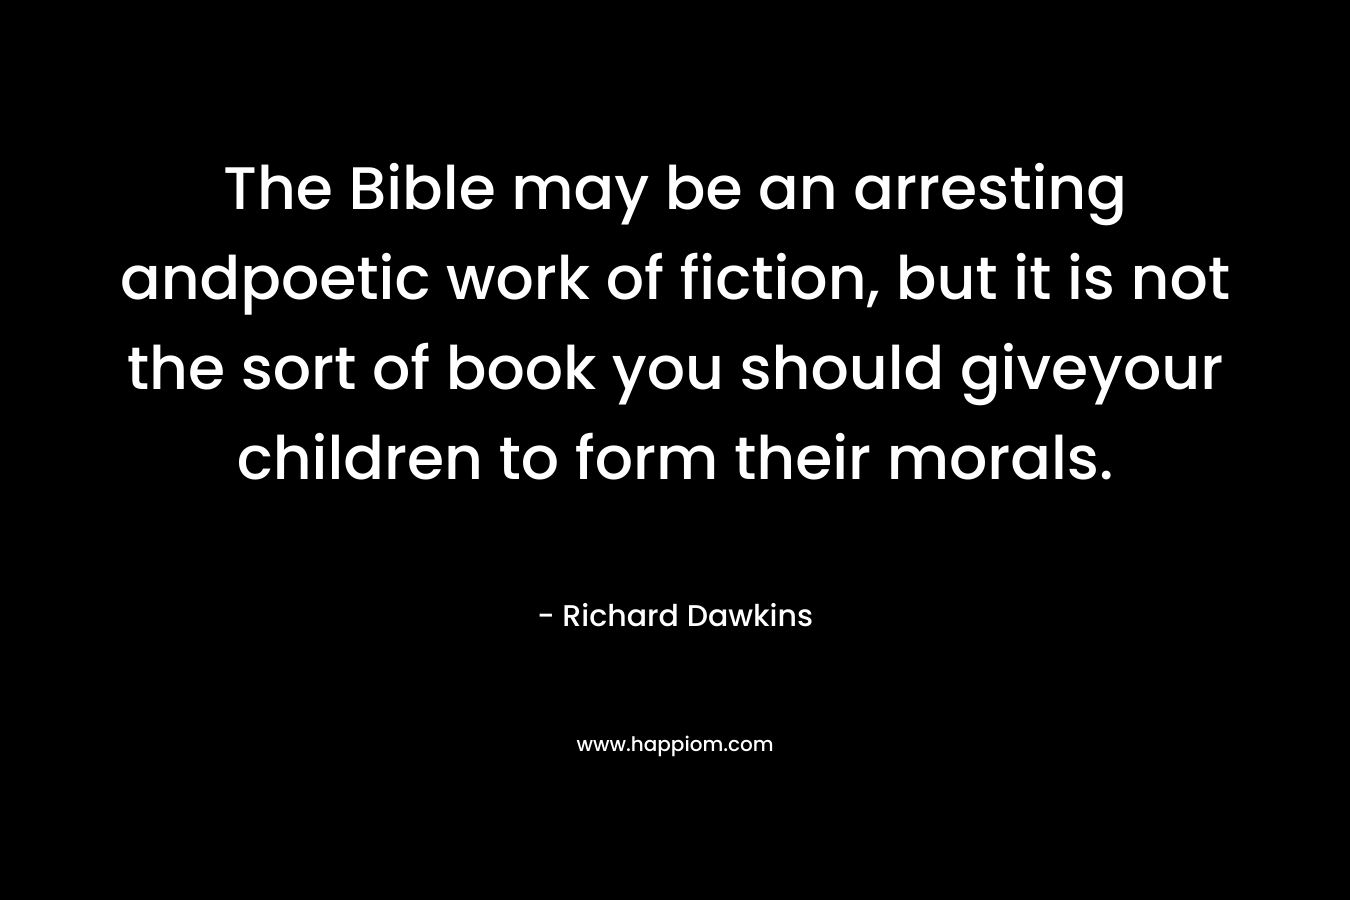 The Bible may be an arresting andpoetic work of fiction, but it is not the sort of book you should giveyour children to form their morals. – Richard Dawkins